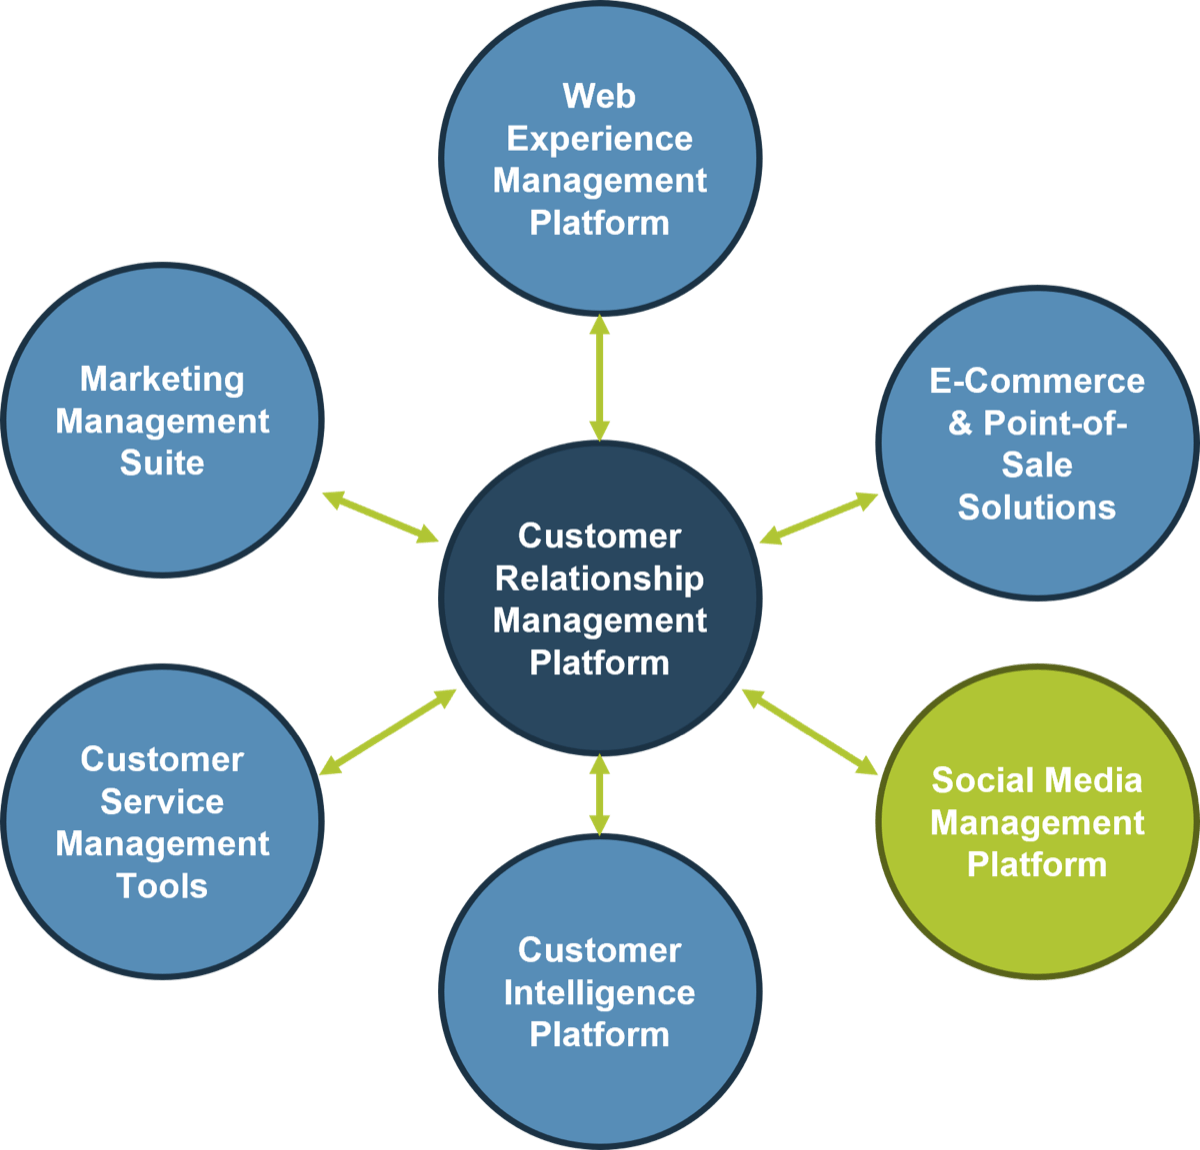 'Customer Relationship Management Platform' surrounded by supporting capabilities, one of which is highlighted, 'Social Media Management Platform'.